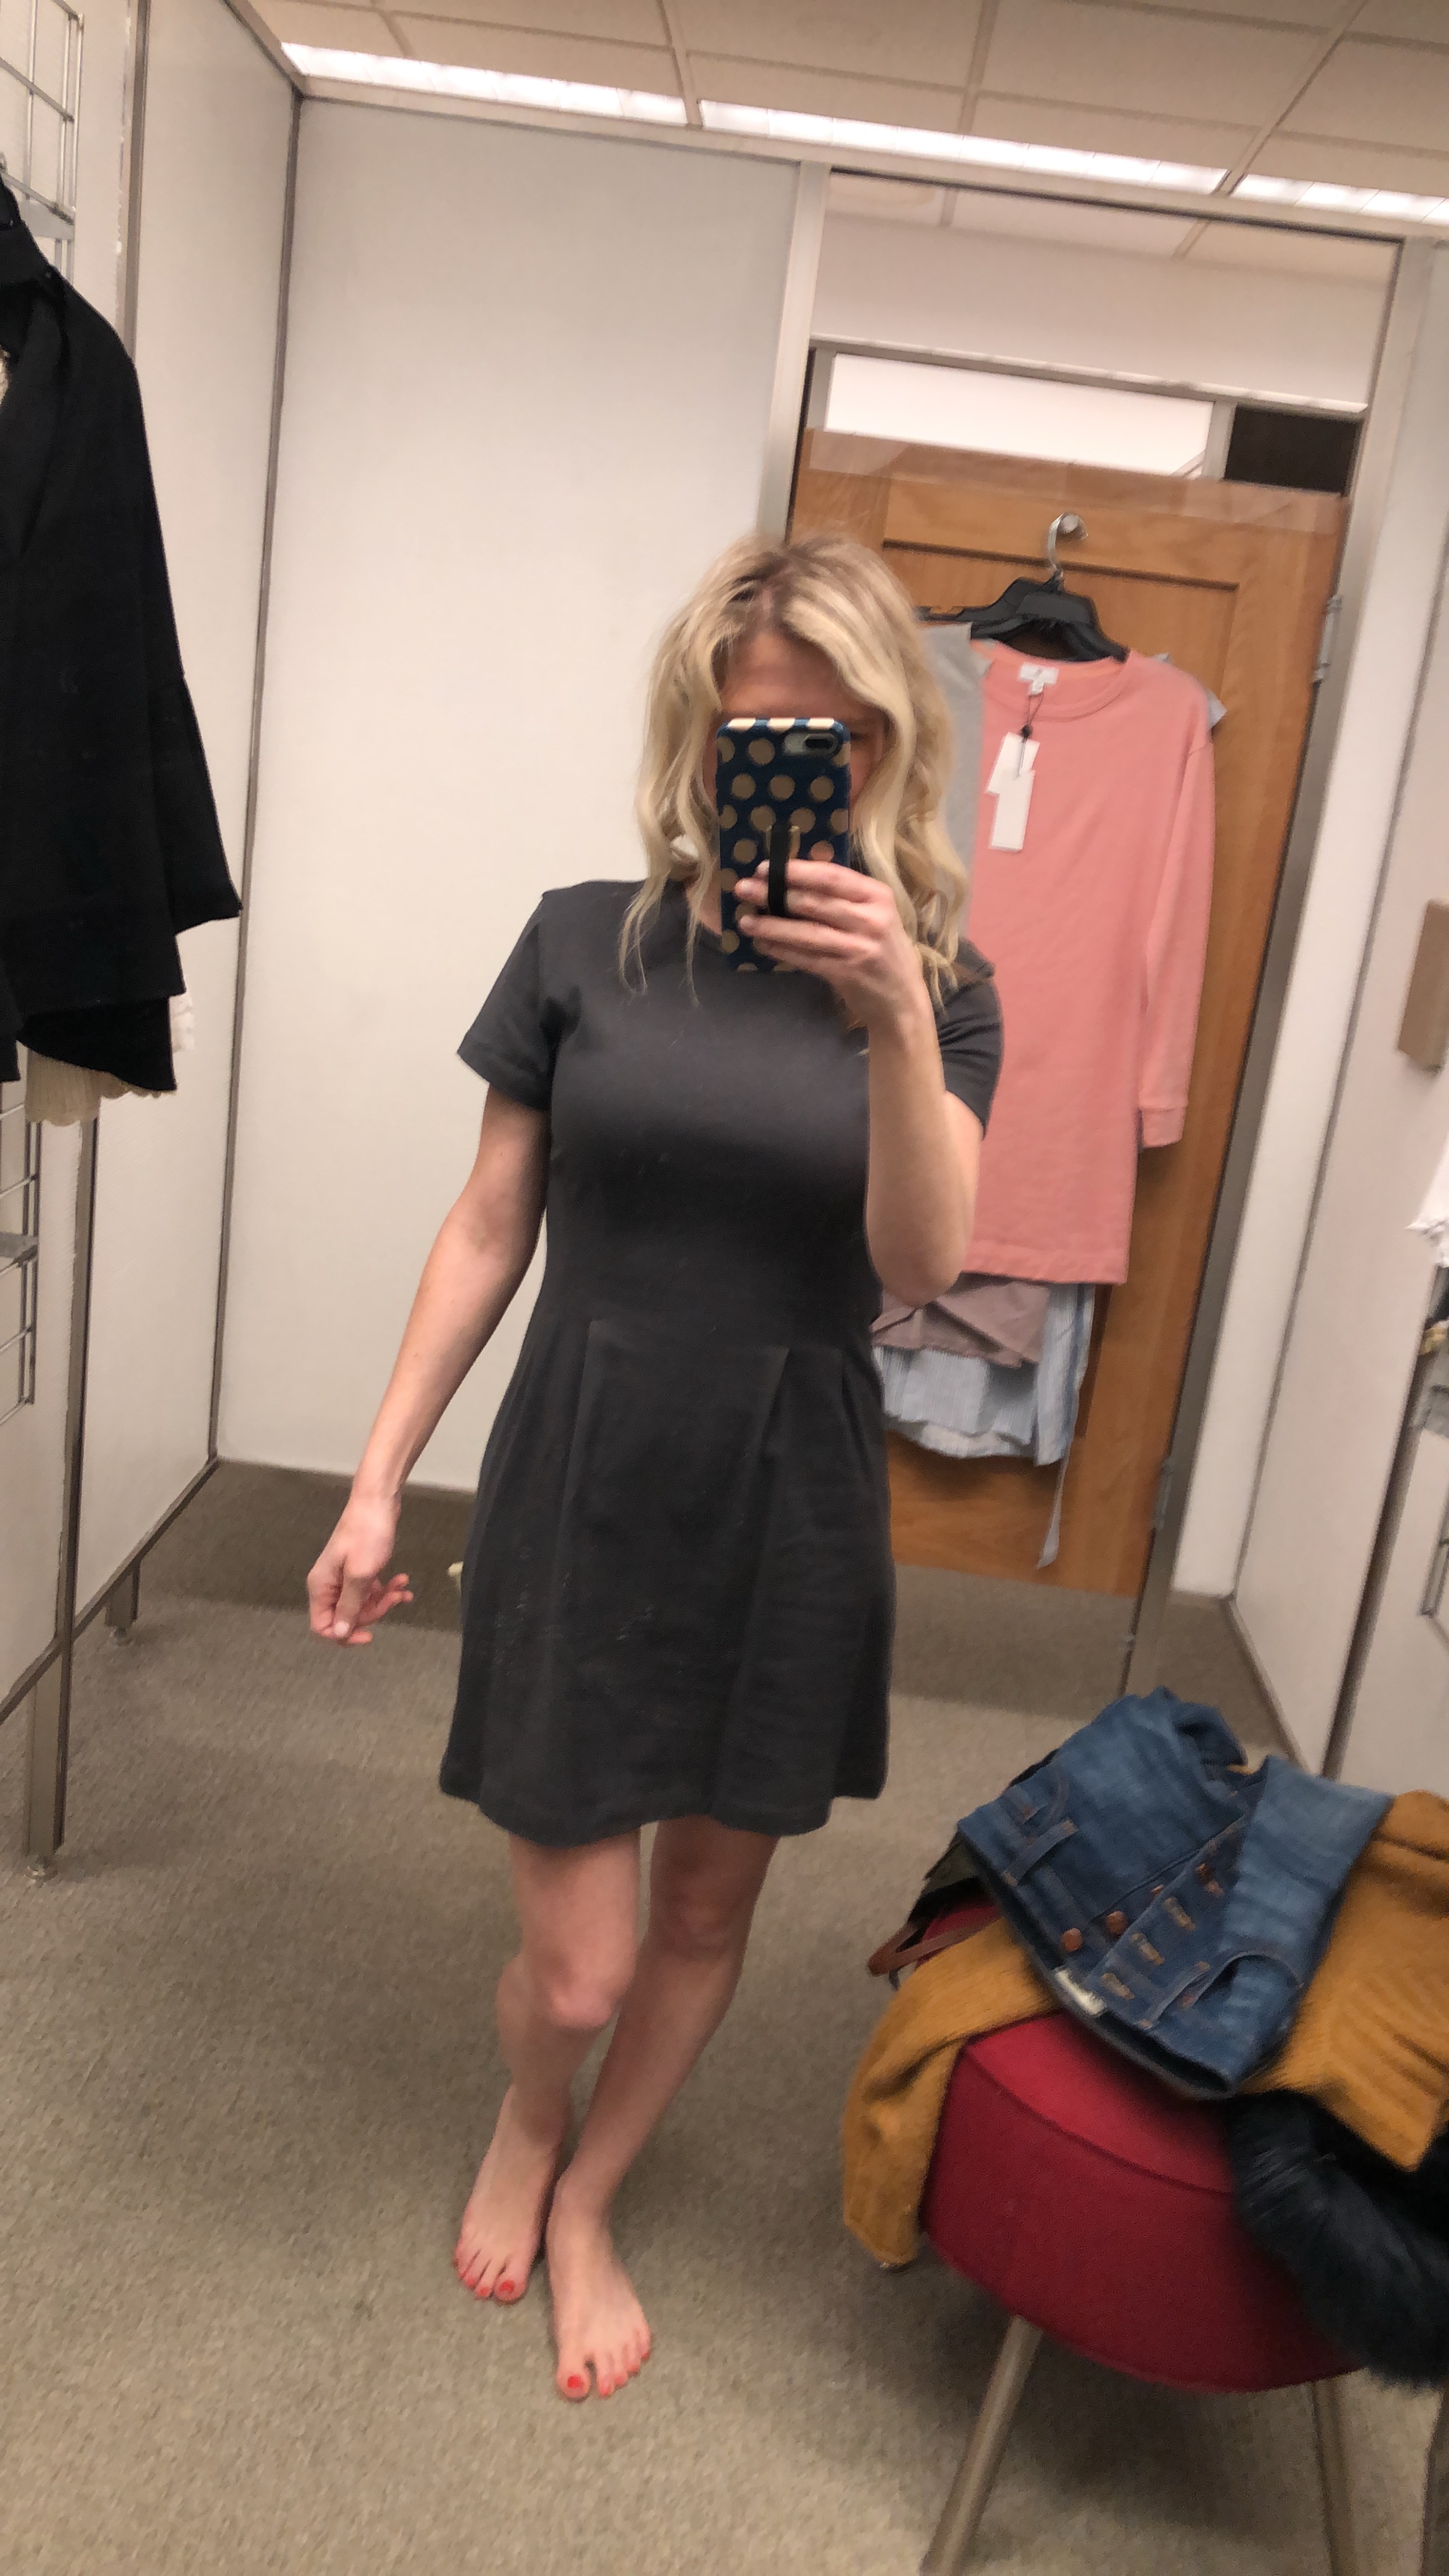 Lush Cotton T-Shirt Dress | Nordstrom Try on Session featured by top Missouri fashion blogger, Emmy Lou Style: image of a woman wearing a grey tshirt dress